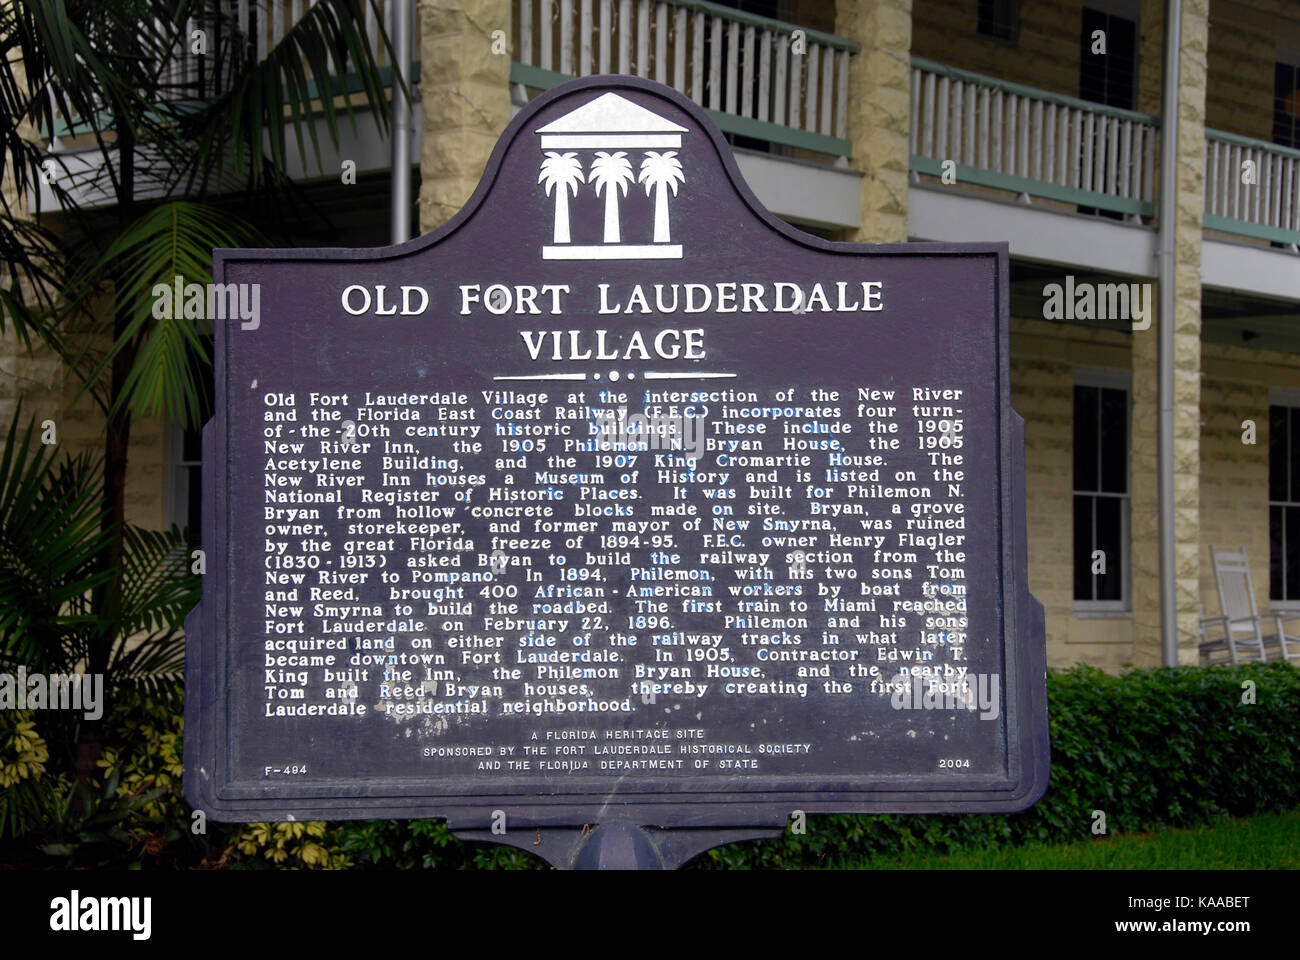 Sign showing history of Old Fort Lauderdale village Stock Photo